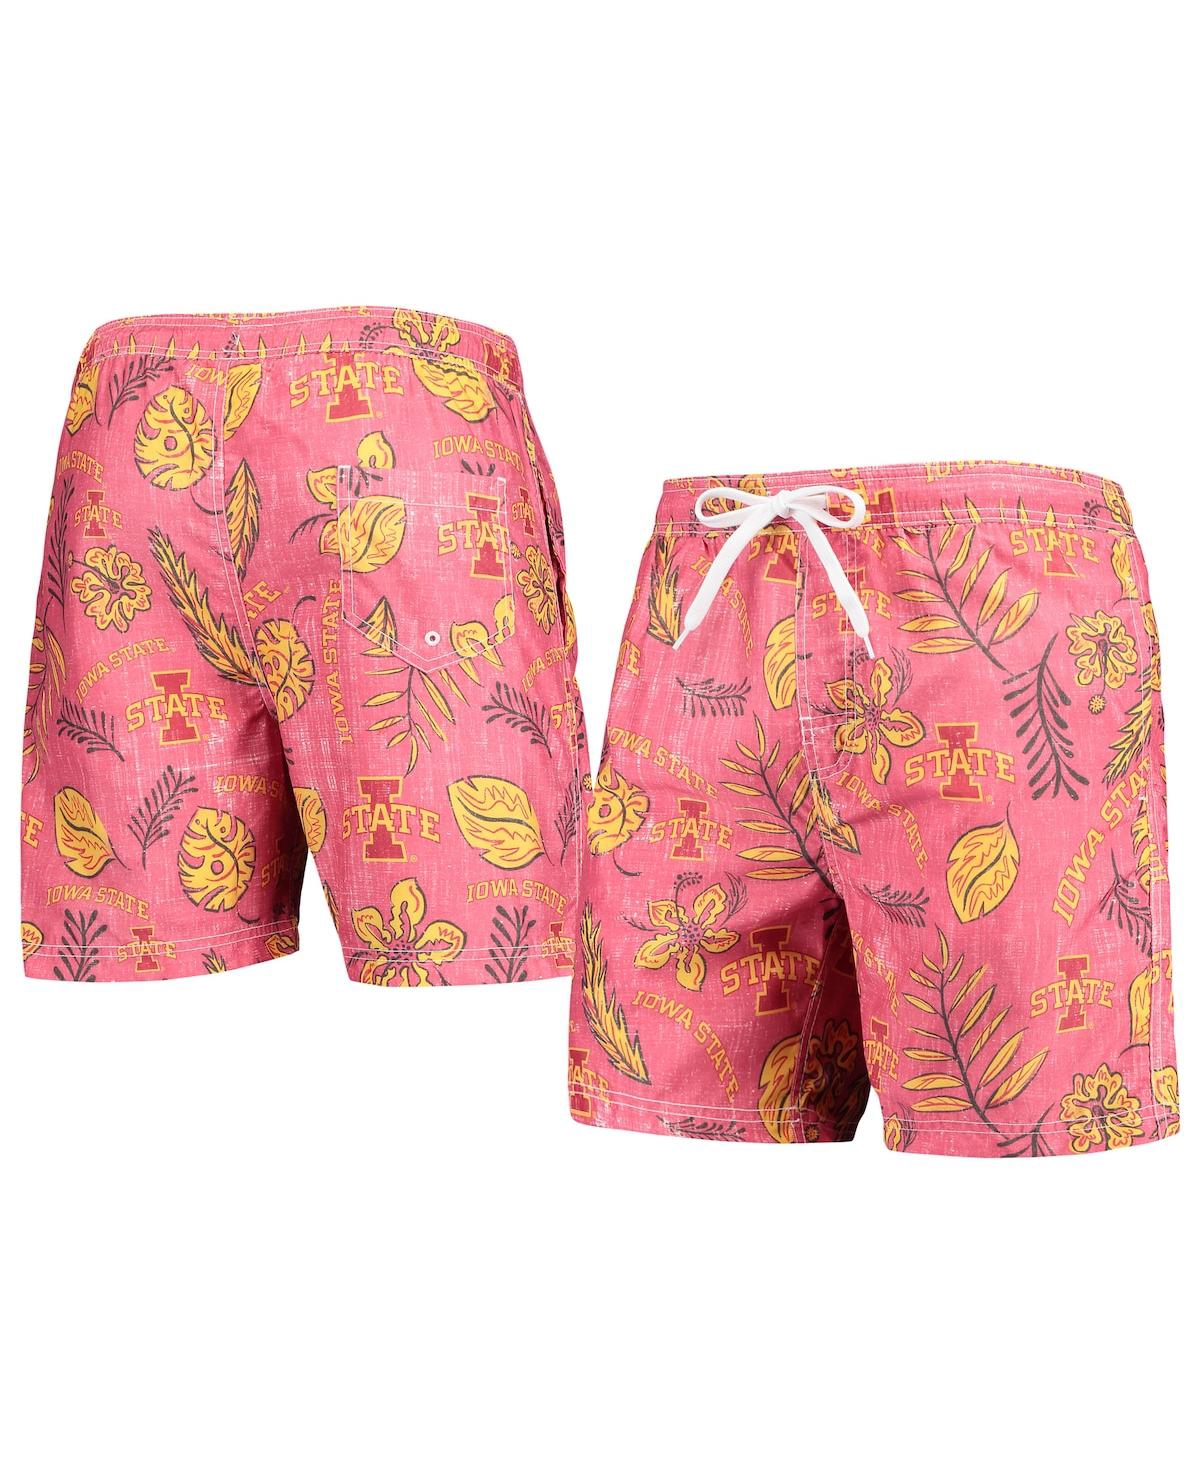 Men's Wes & Willy Cardinal Distressed Iowa State Cyclones Vintage-Like Floral Swim Trunks - Cardinal